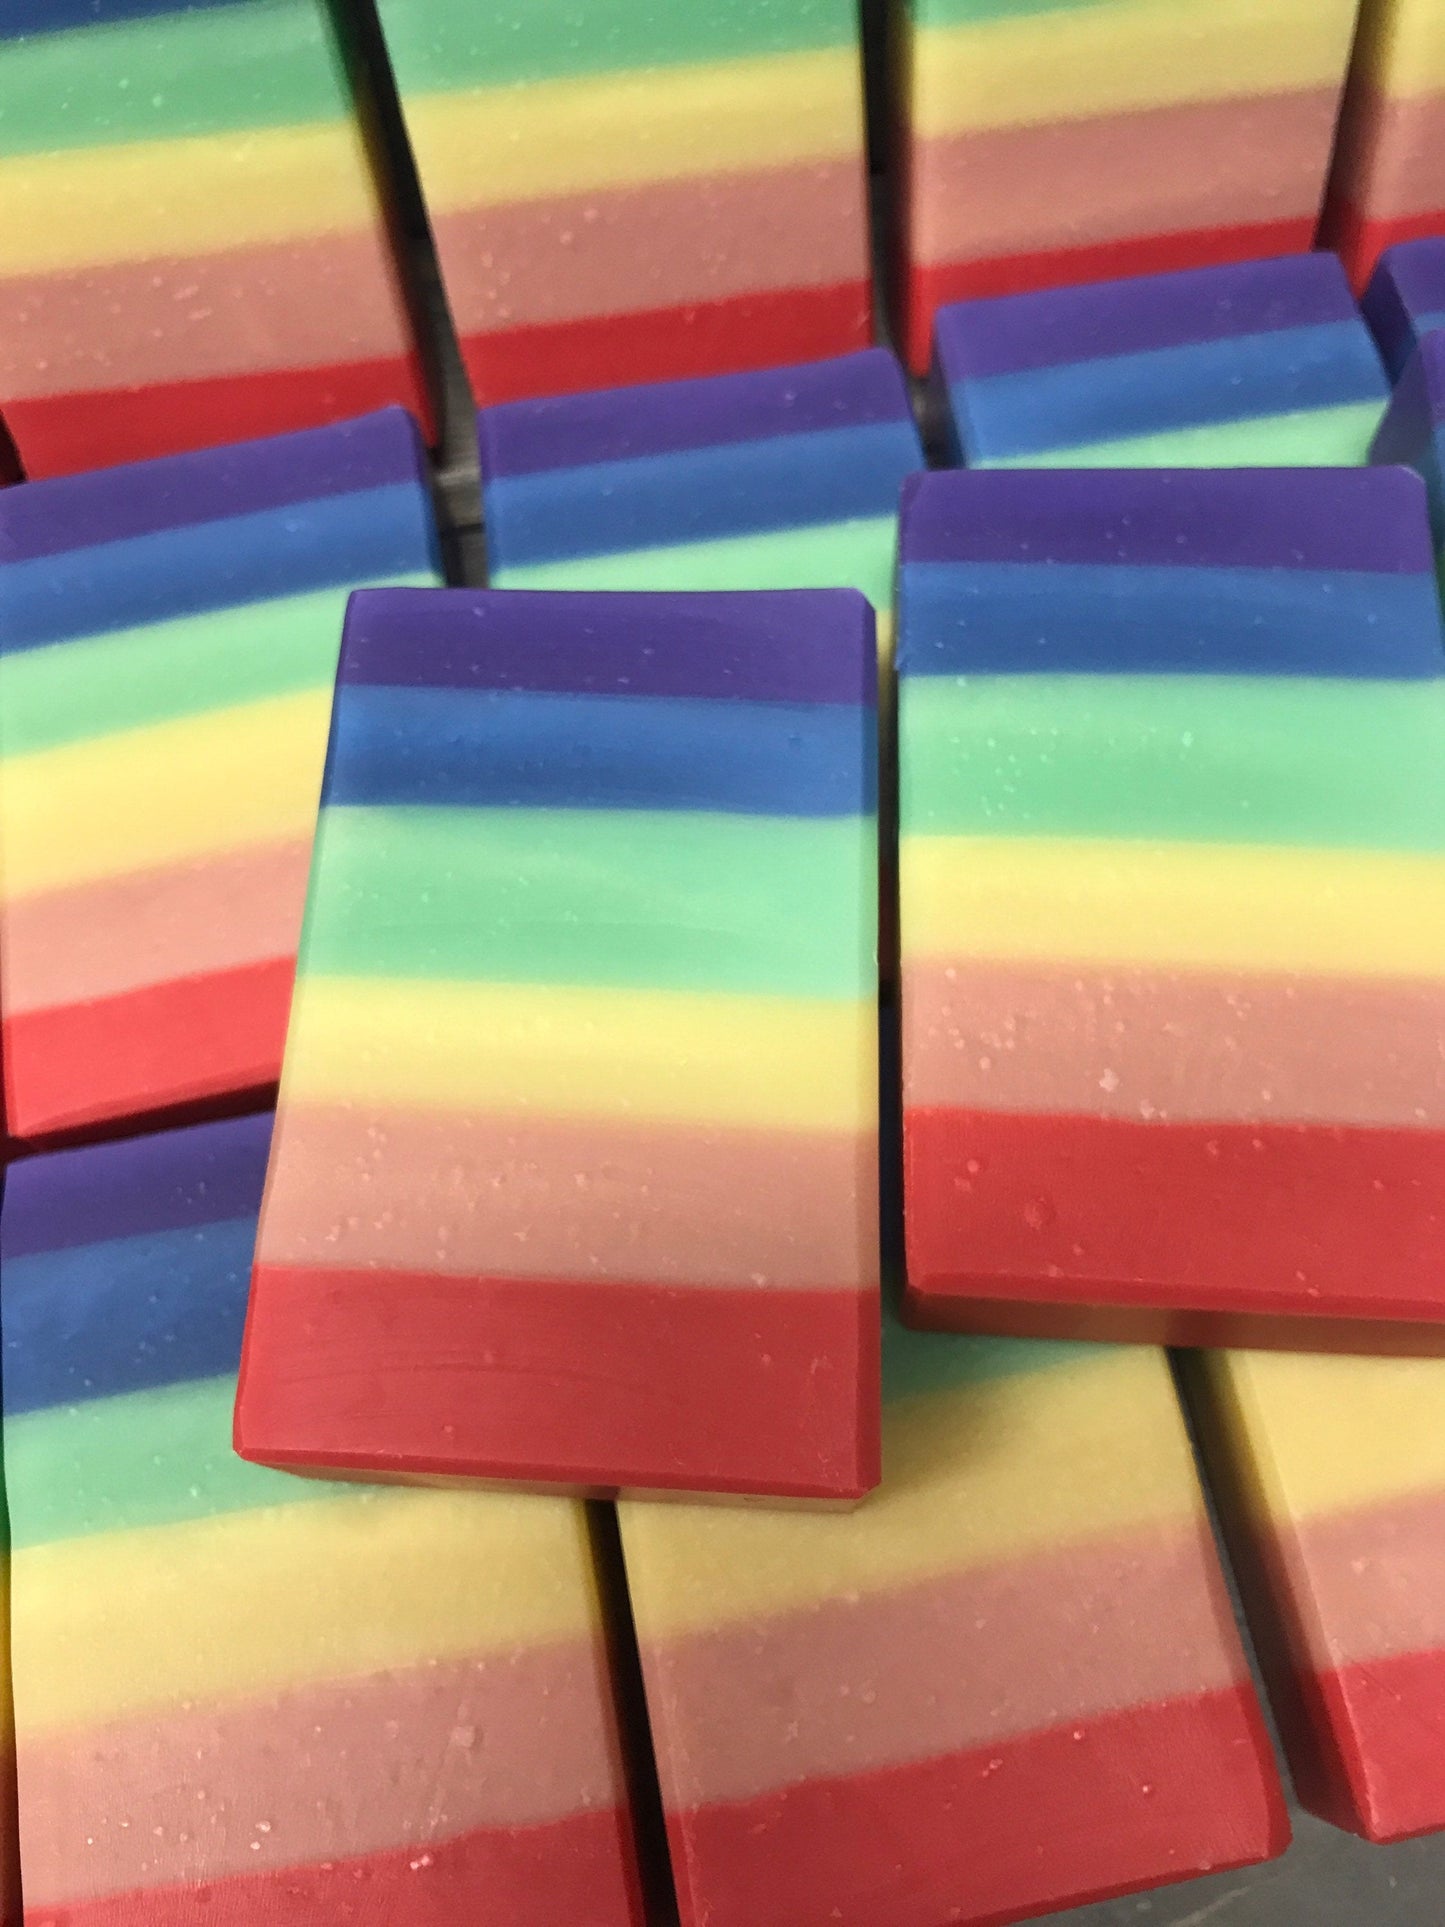 A photo showing Rainbow Soap scented in Black Raspberry Vanilla Soap Bar